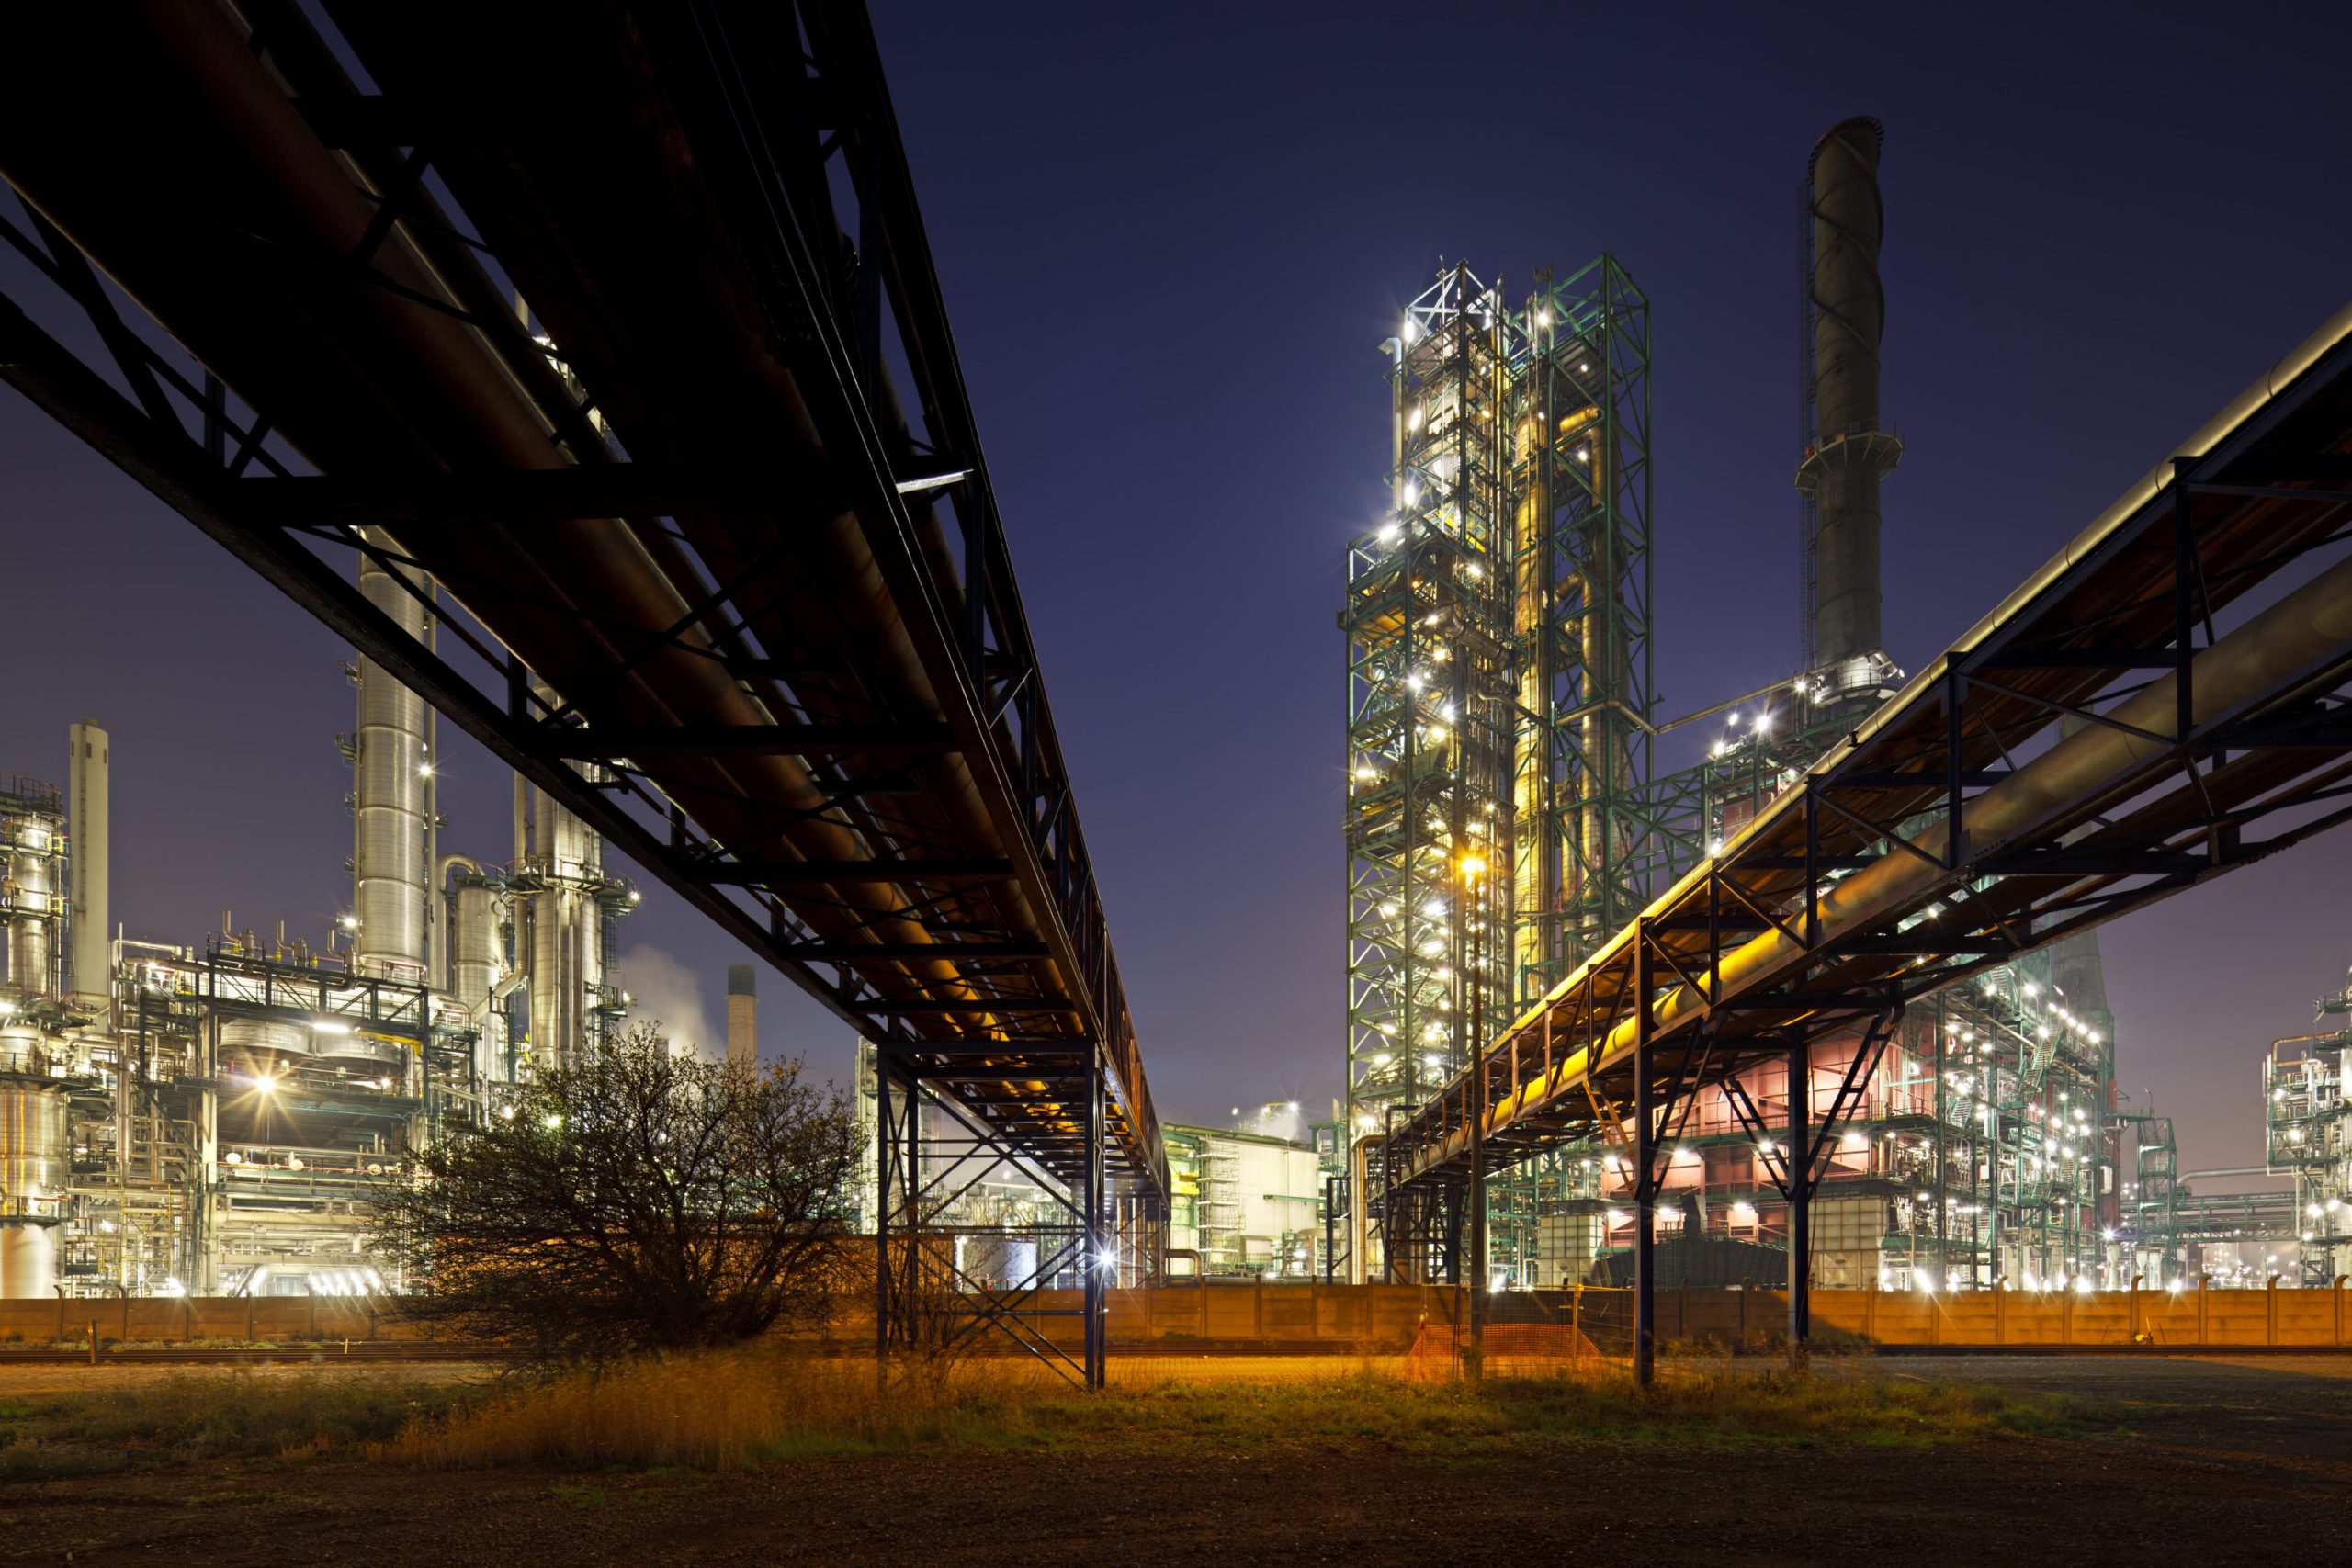 pipelines-and-refinery-at-night-P9R2MPY